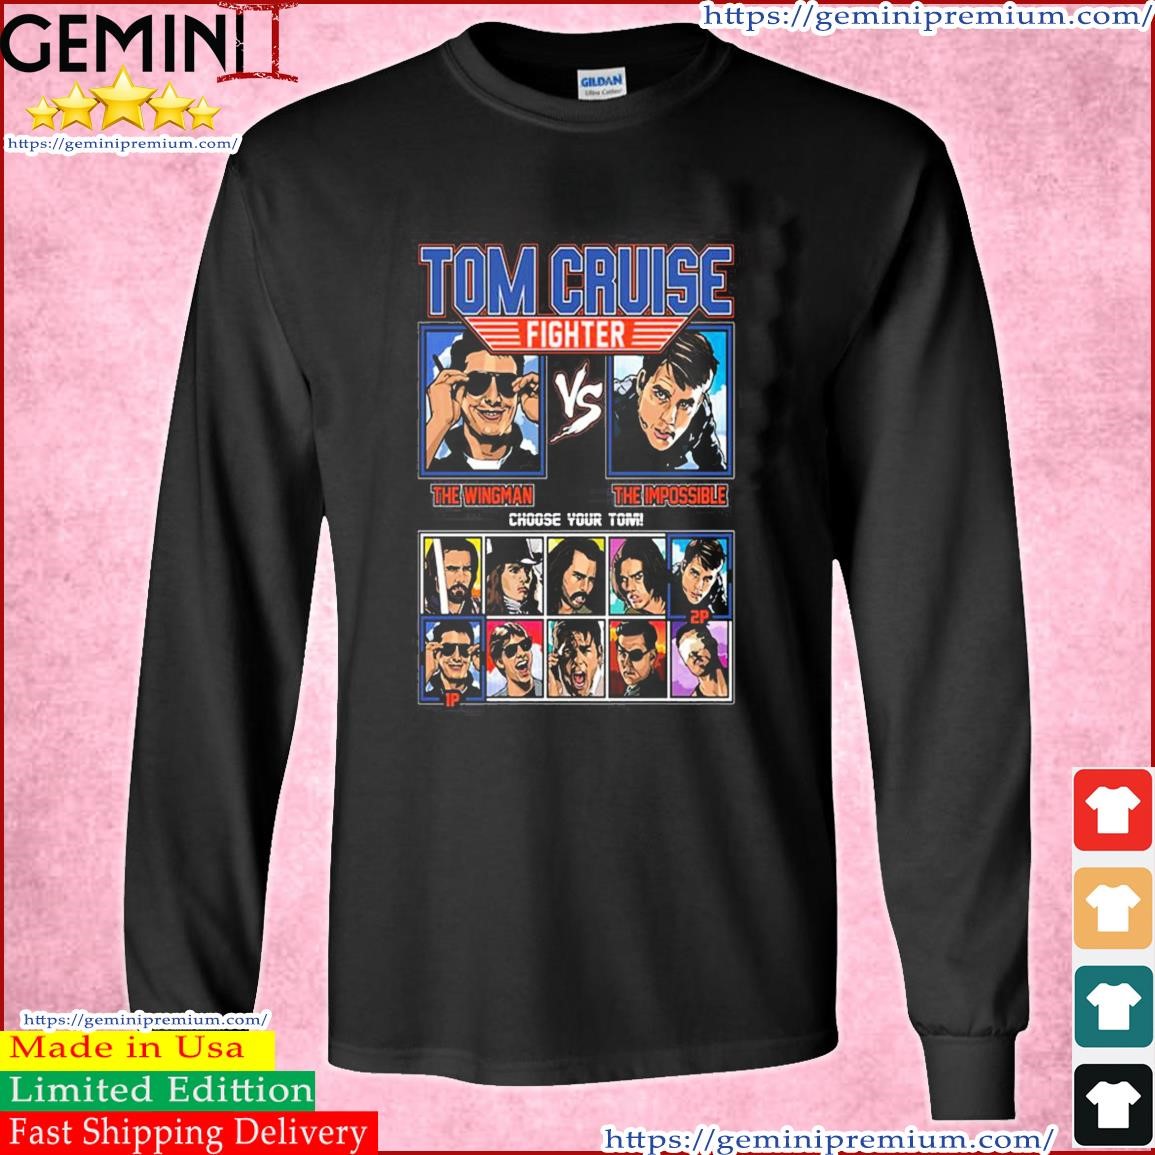 Tom Cruise Fighter Topgun Vs Mission Impossible Shirt Long Sleeve Tee.jpg